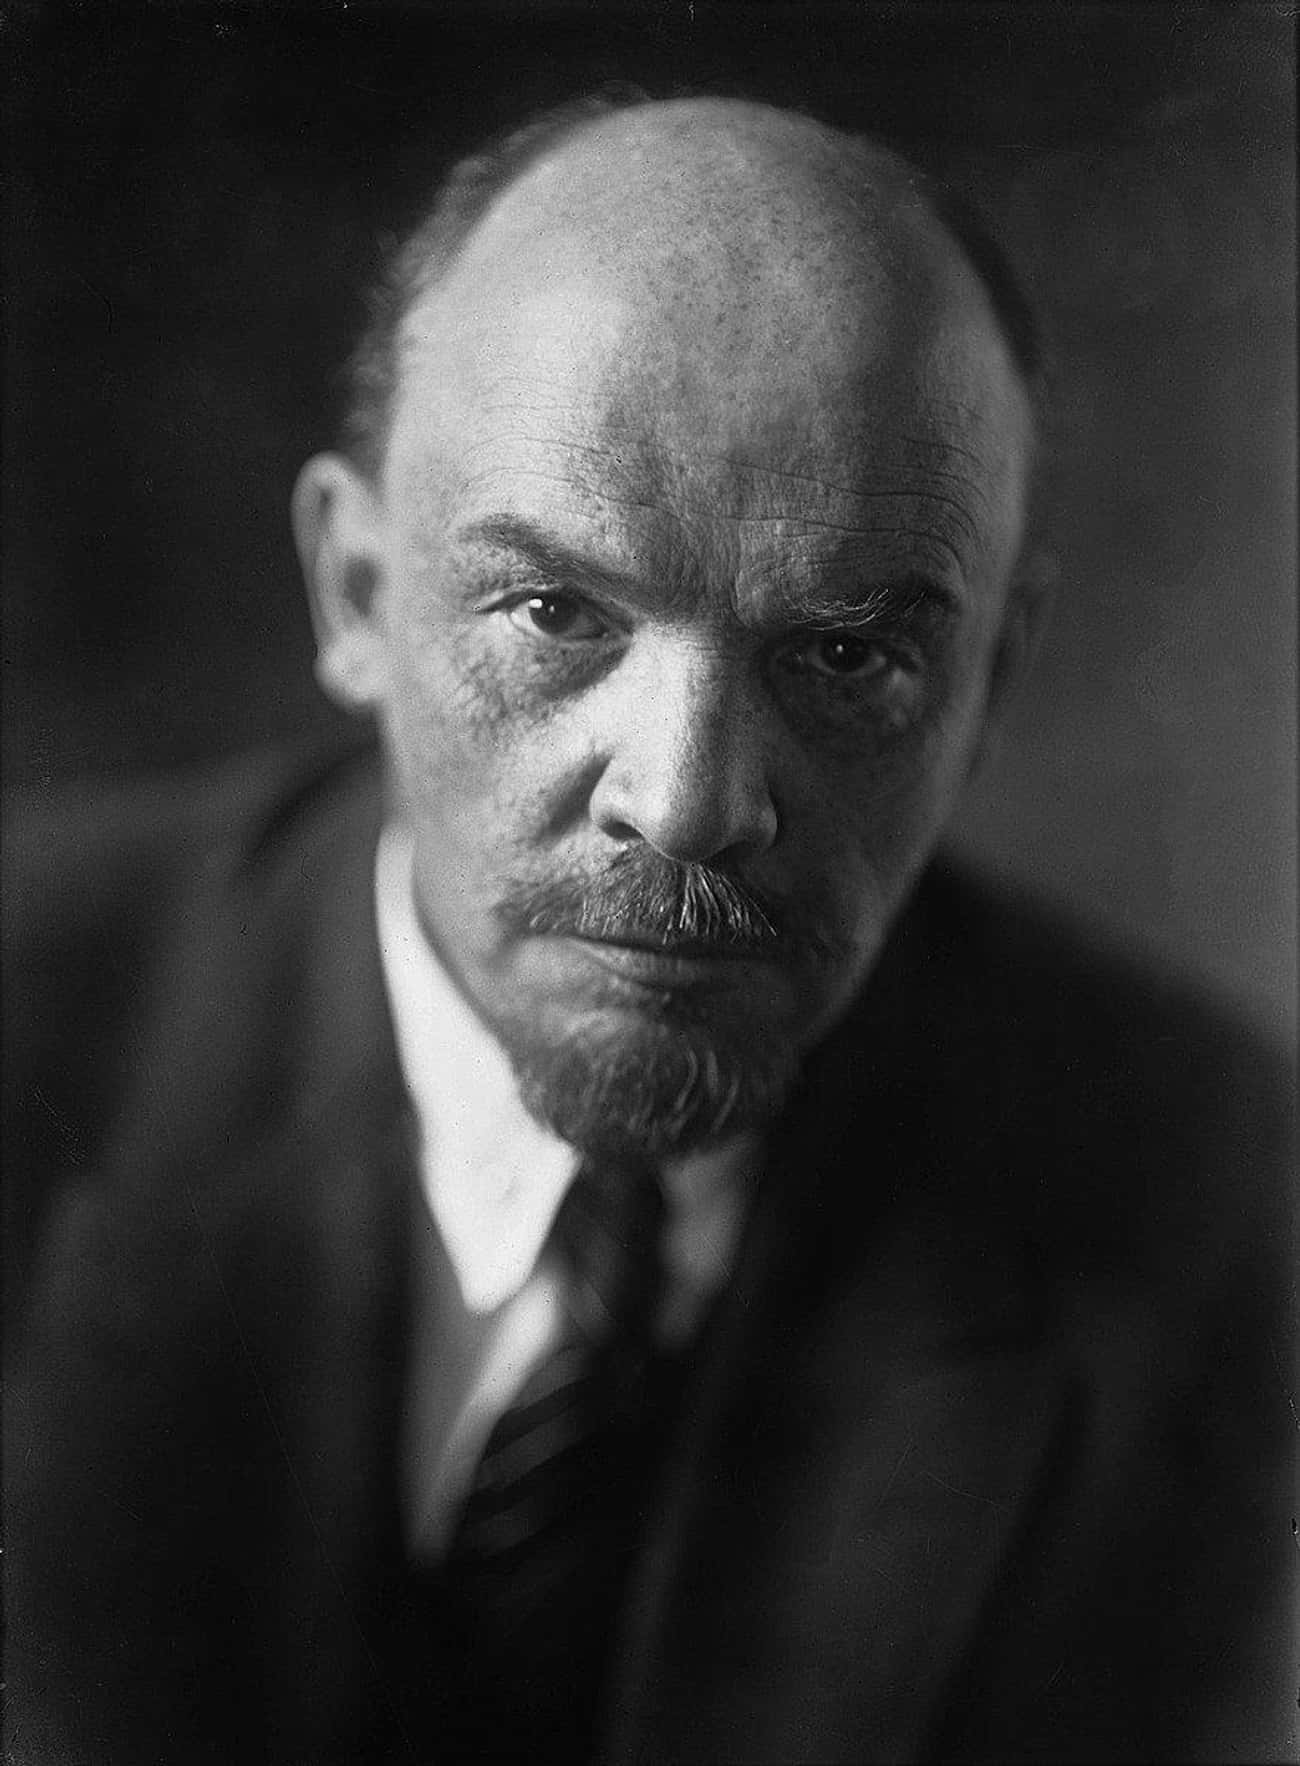 Vladimir Lenin May Have Died Of Syphilis